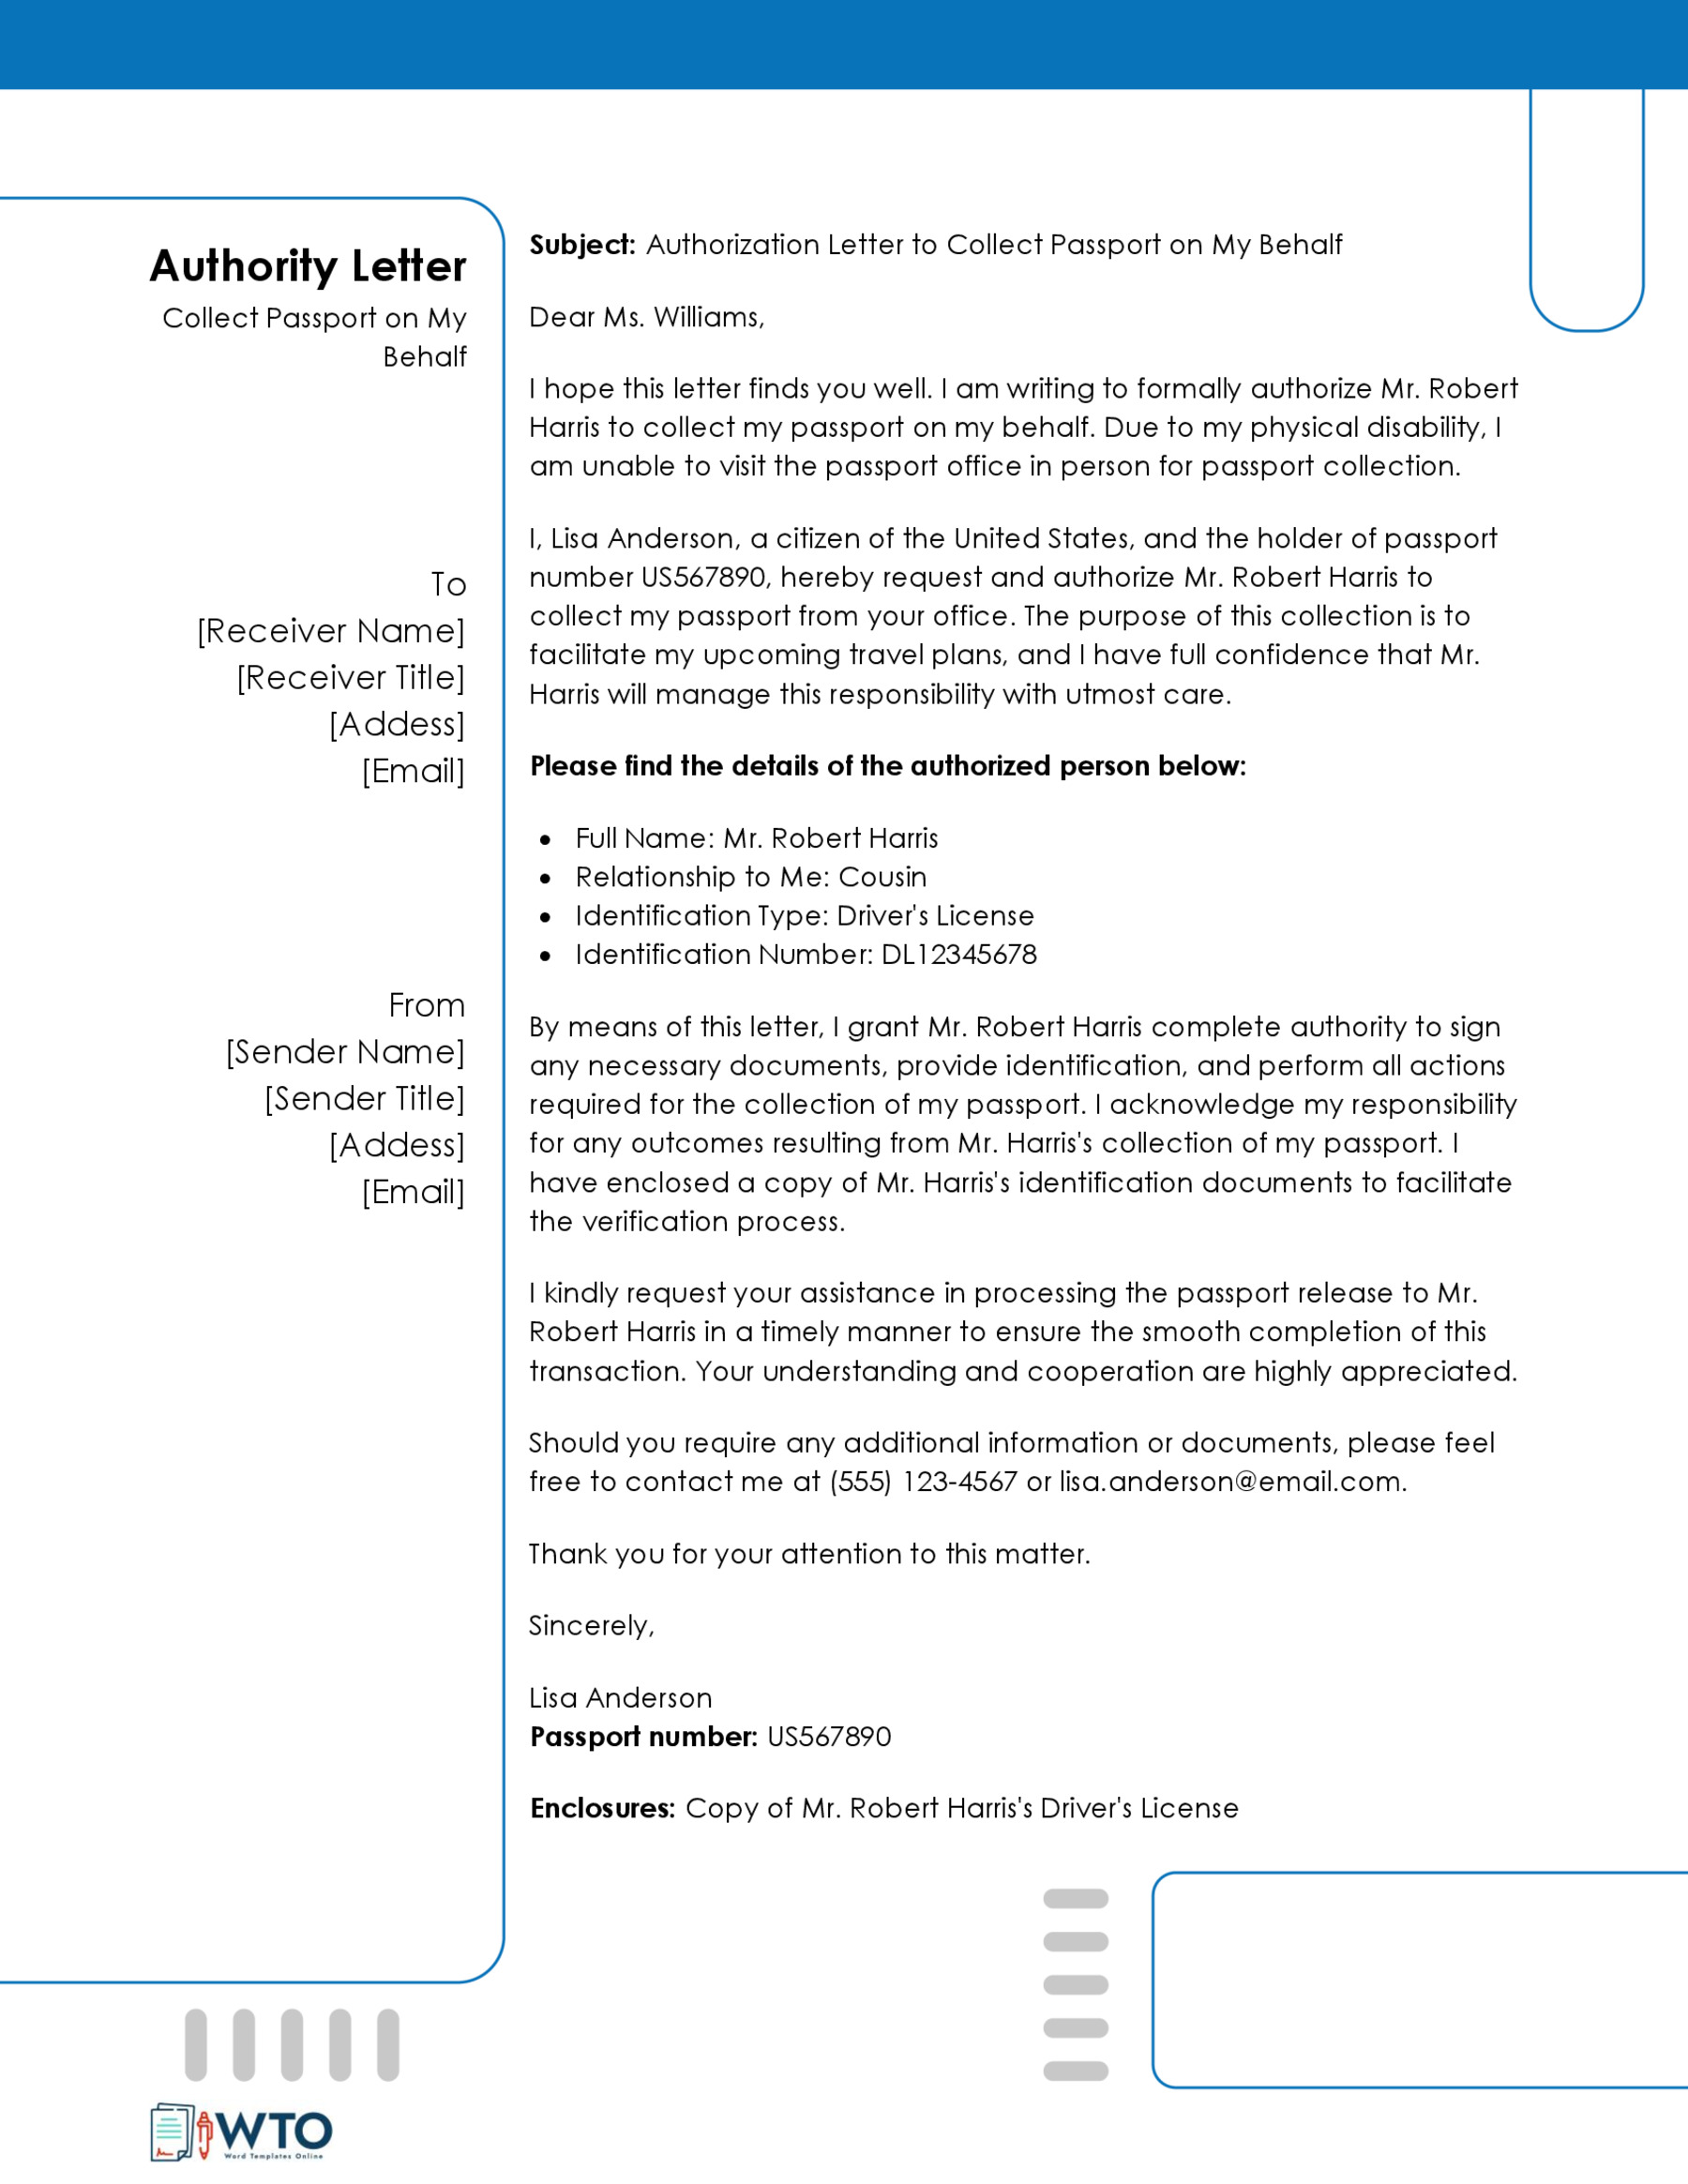 Sample Authorization letter to collect passport-Free Download